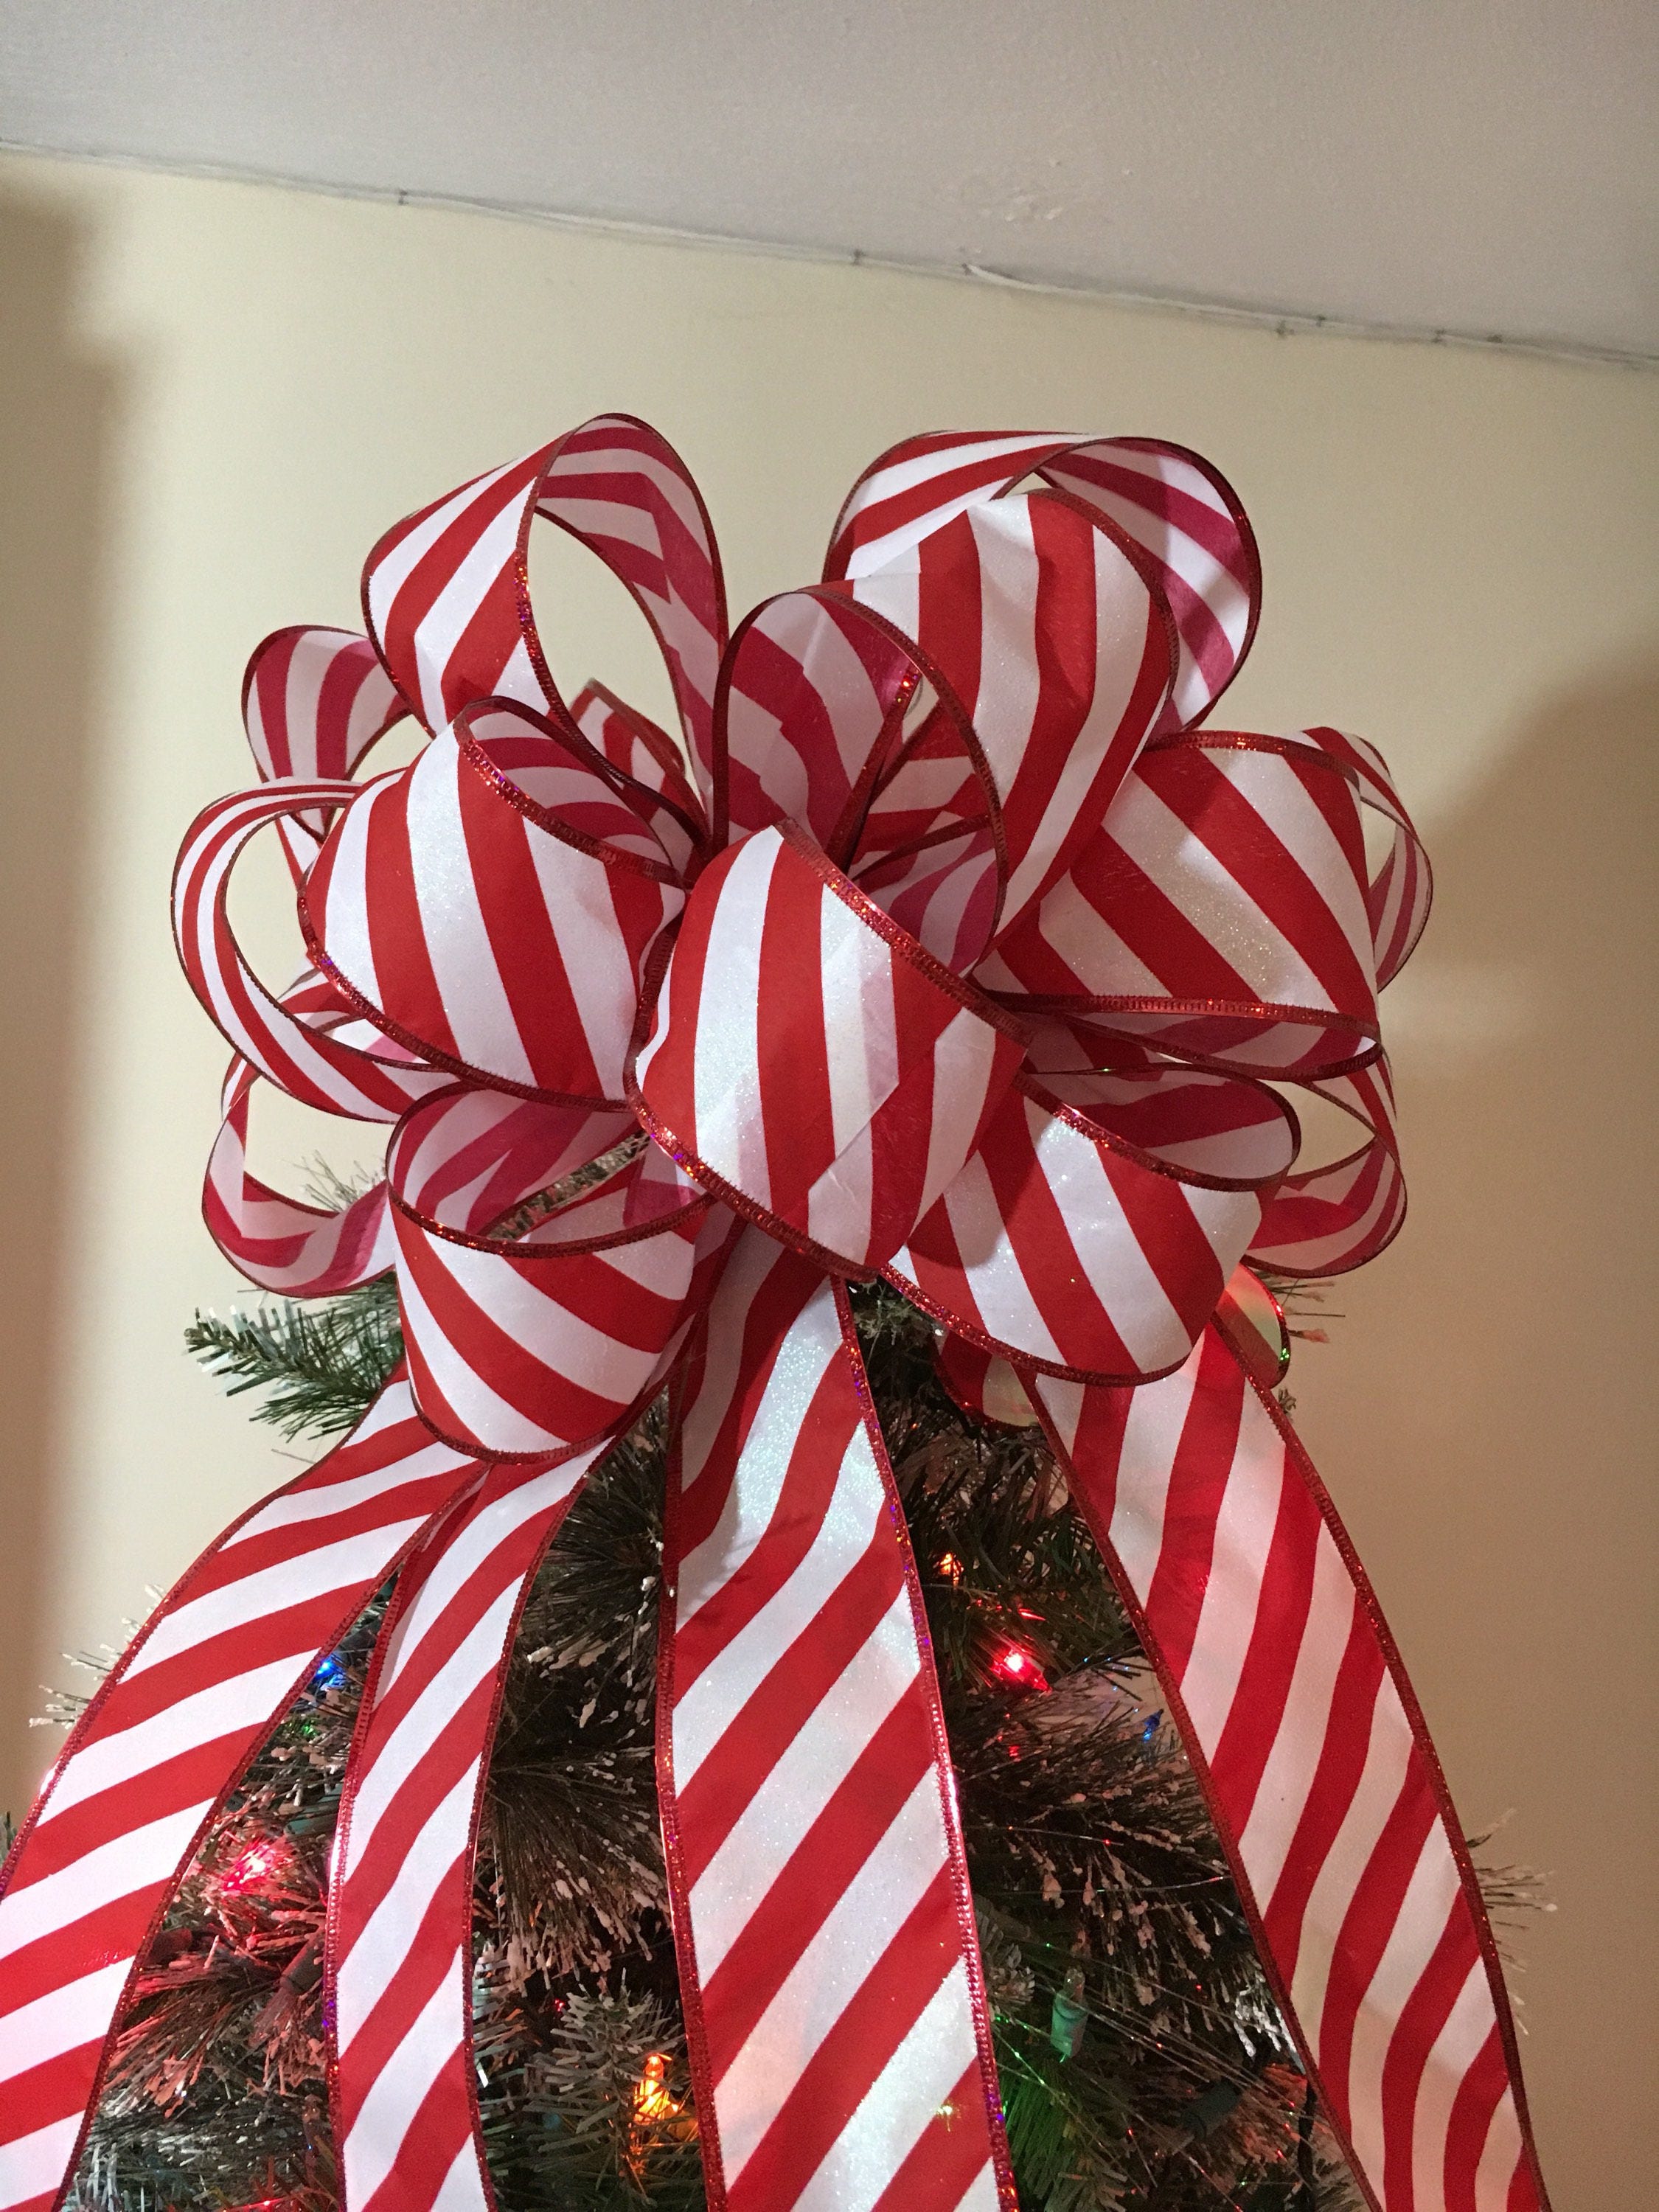 2 Rolls 20 Yards Red and White Striped Ribbons, 2.5 Inch Wide - Candy Cane  Glitter Ribbons for Christmas Tree and Gift Wrapping